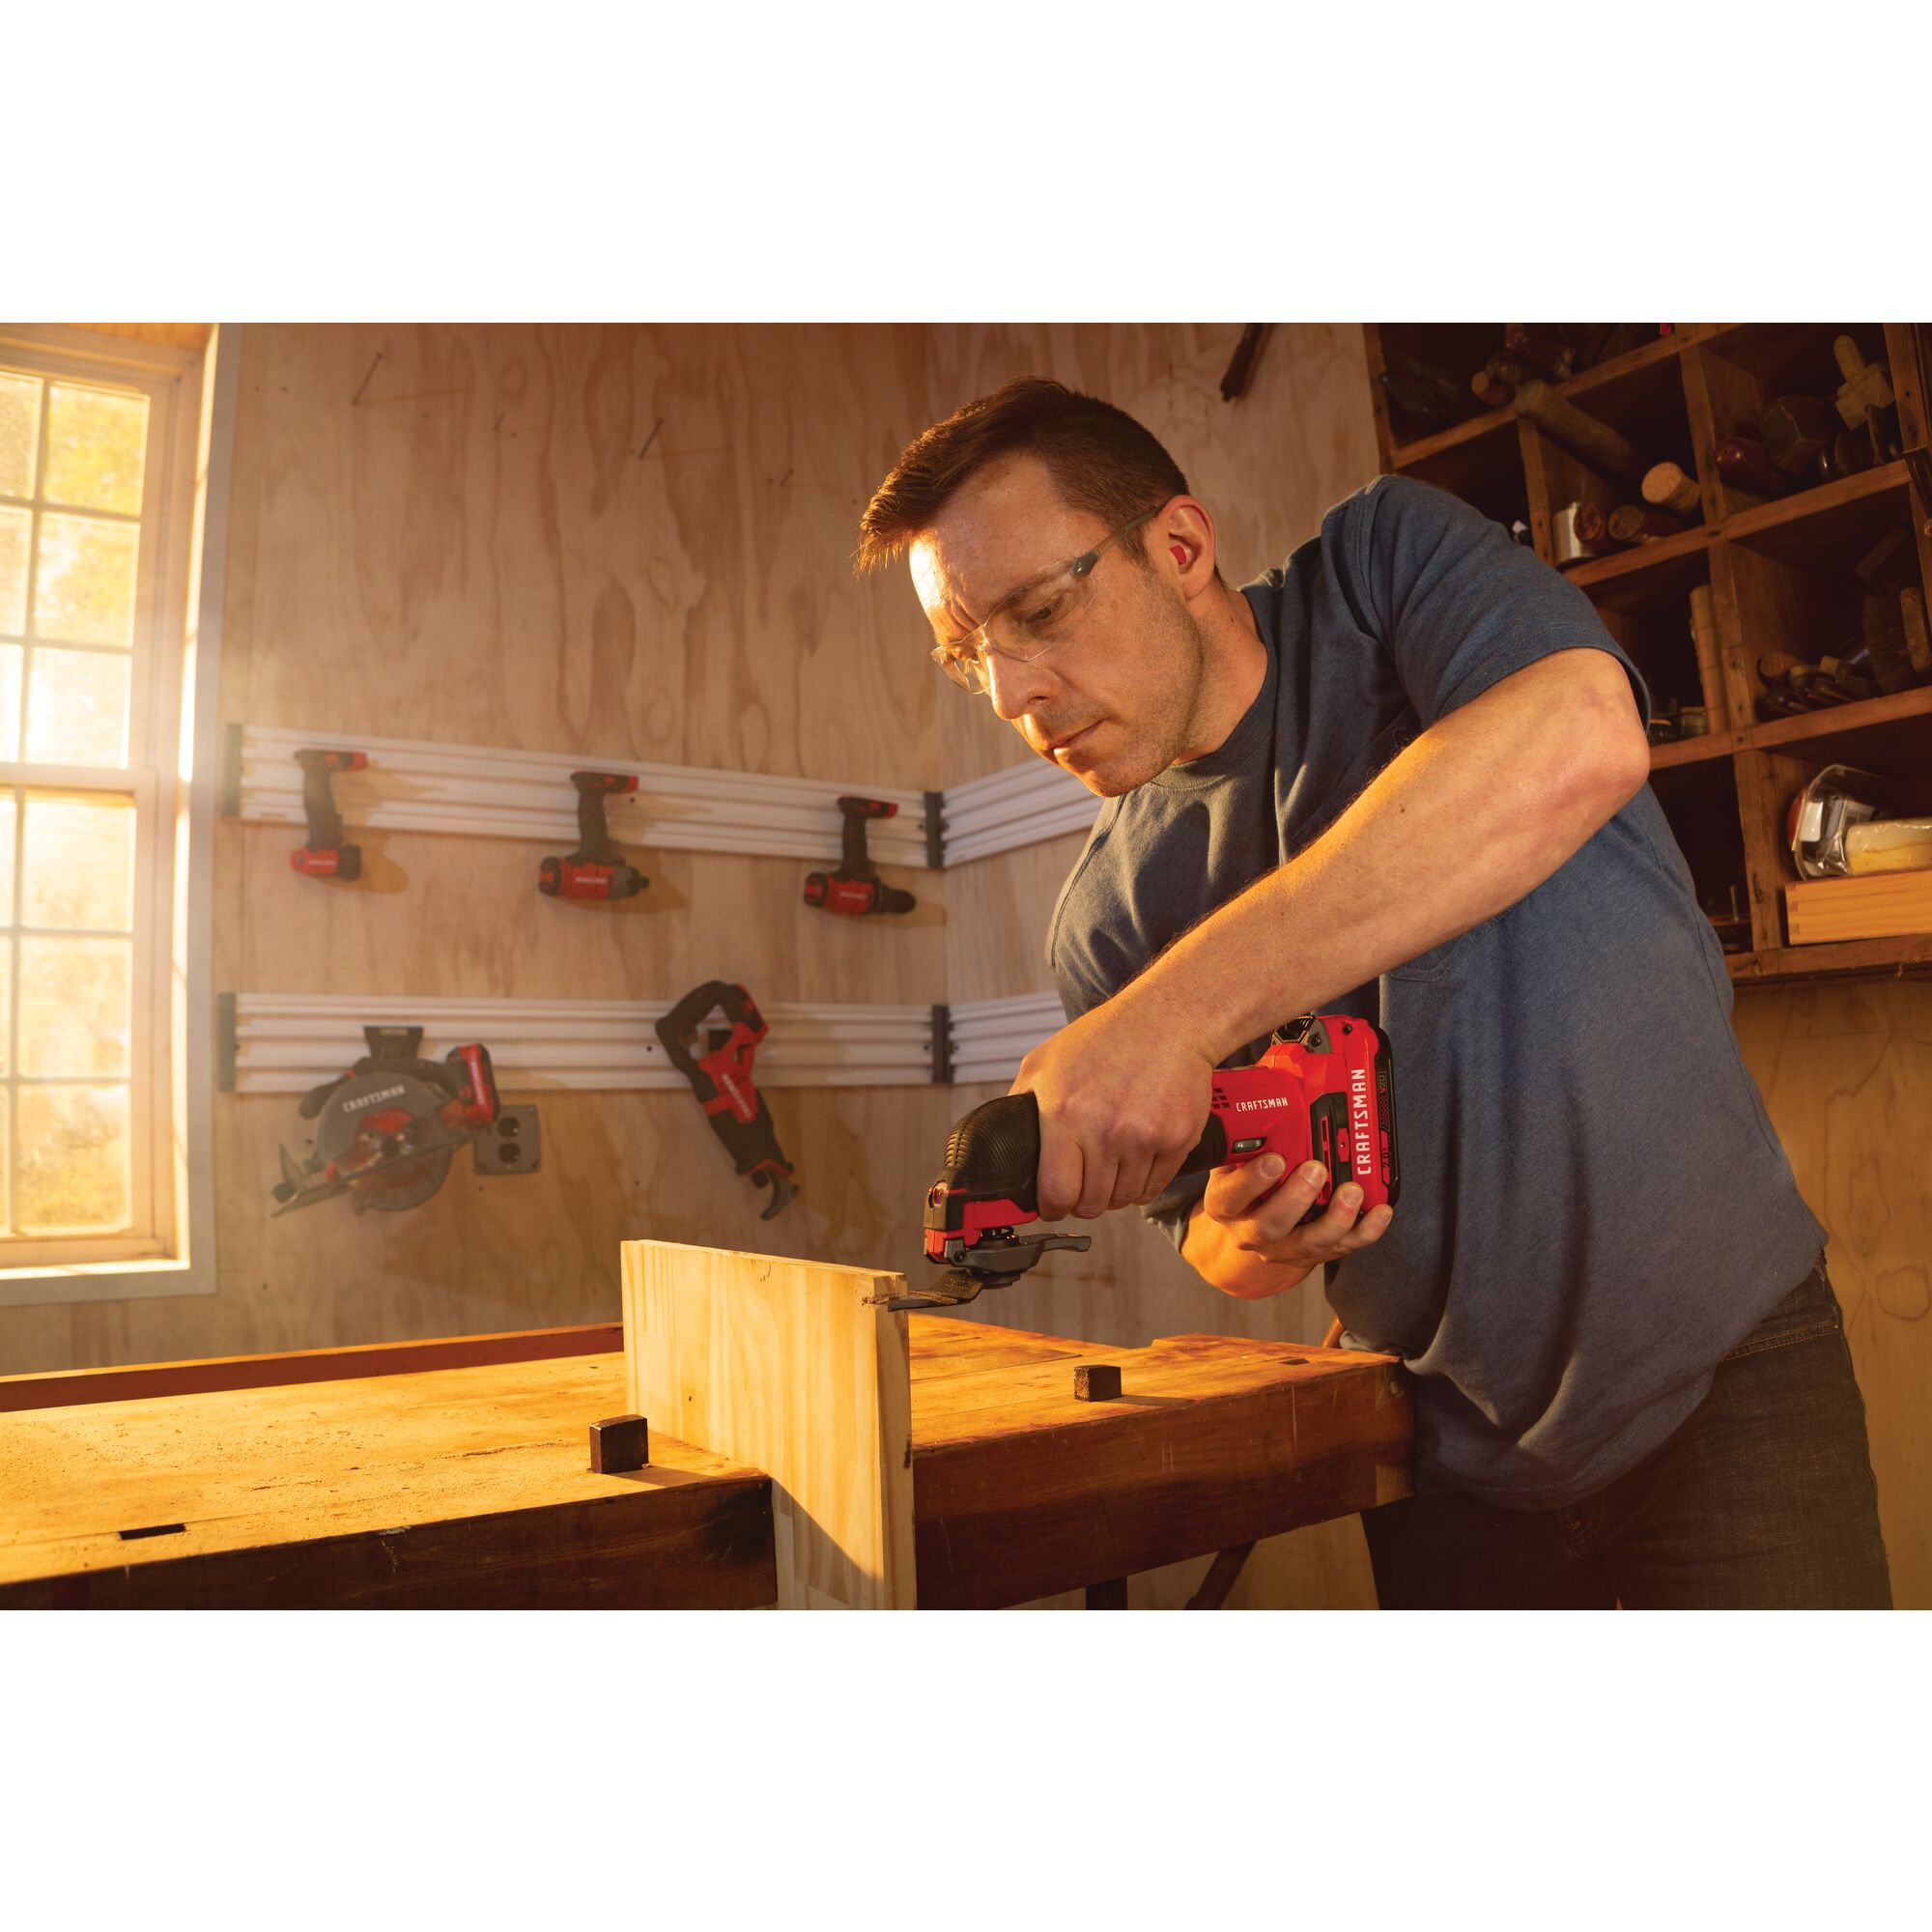 Cordless oscillating tool kit being used on wooden plank.